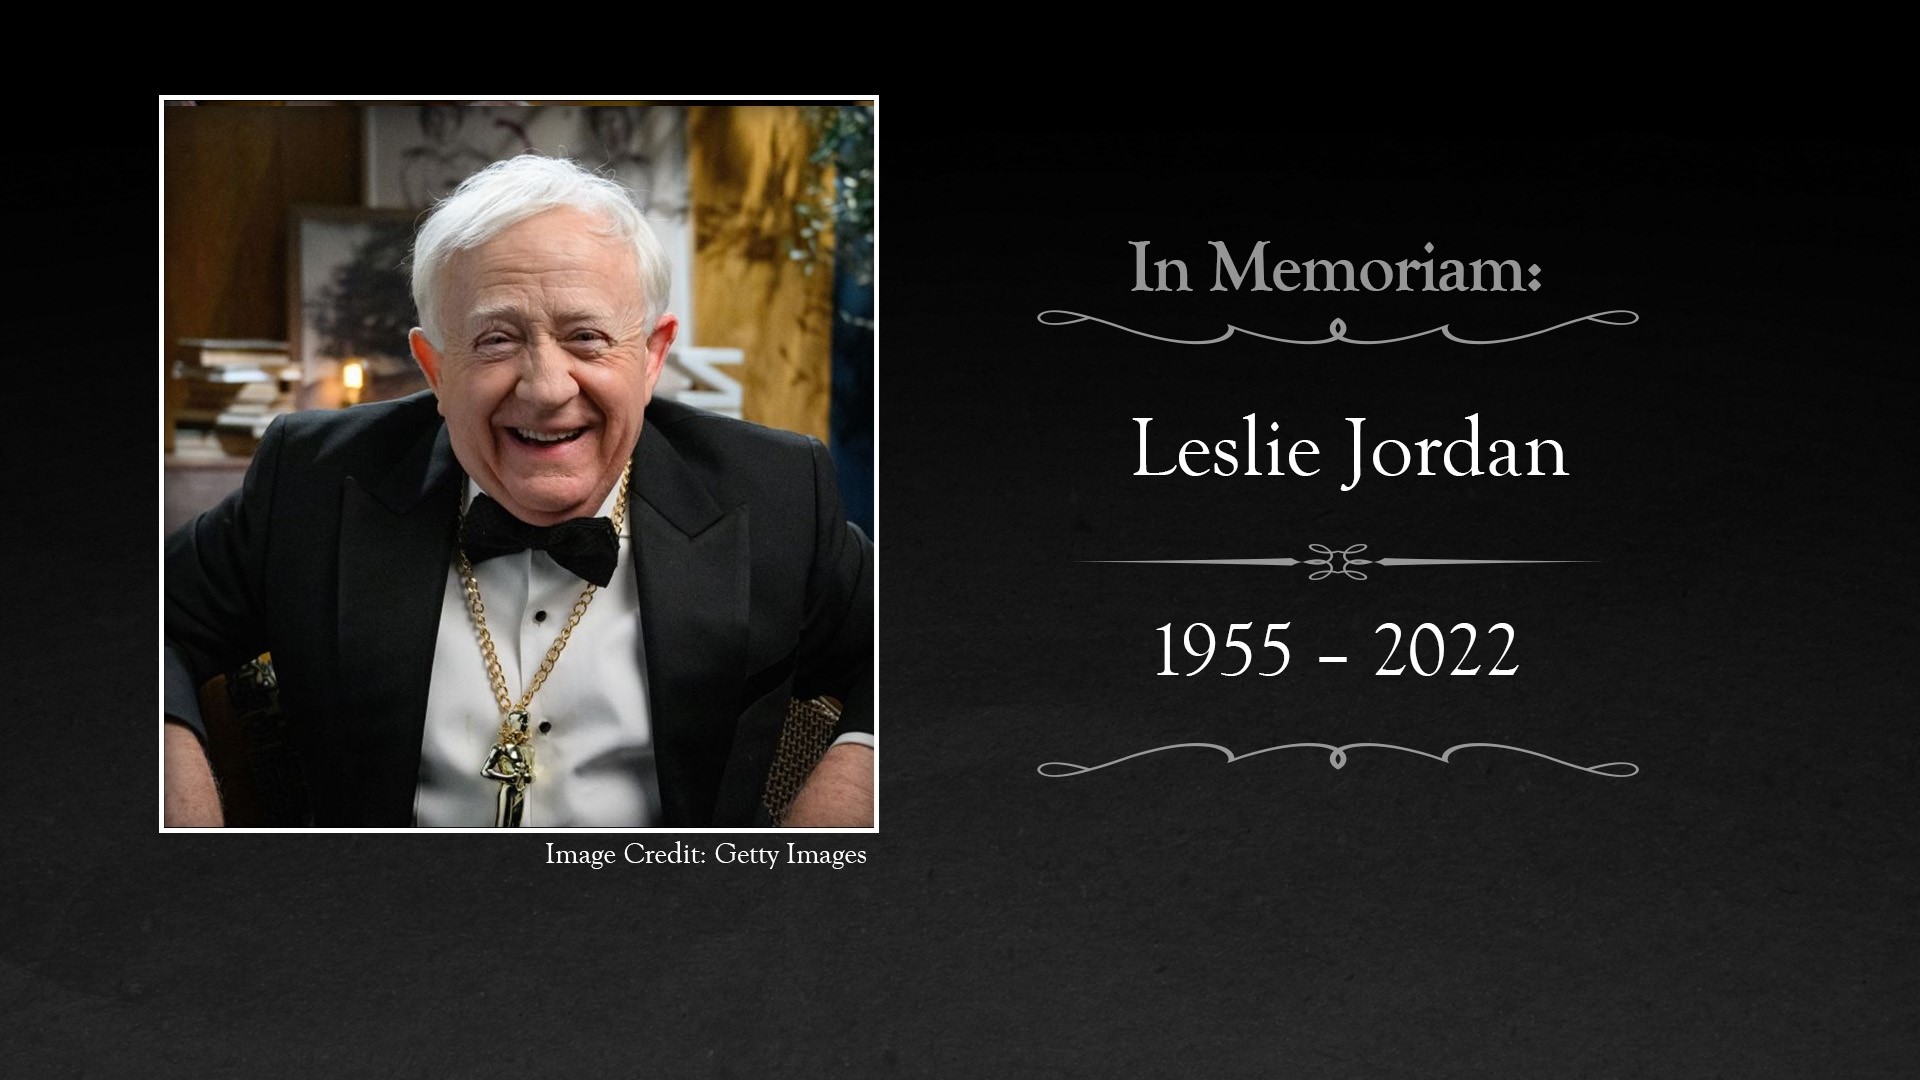 Actor Leslie Jordan passed away Monday following a car crash at age 67, his representative confirmed to outlets.